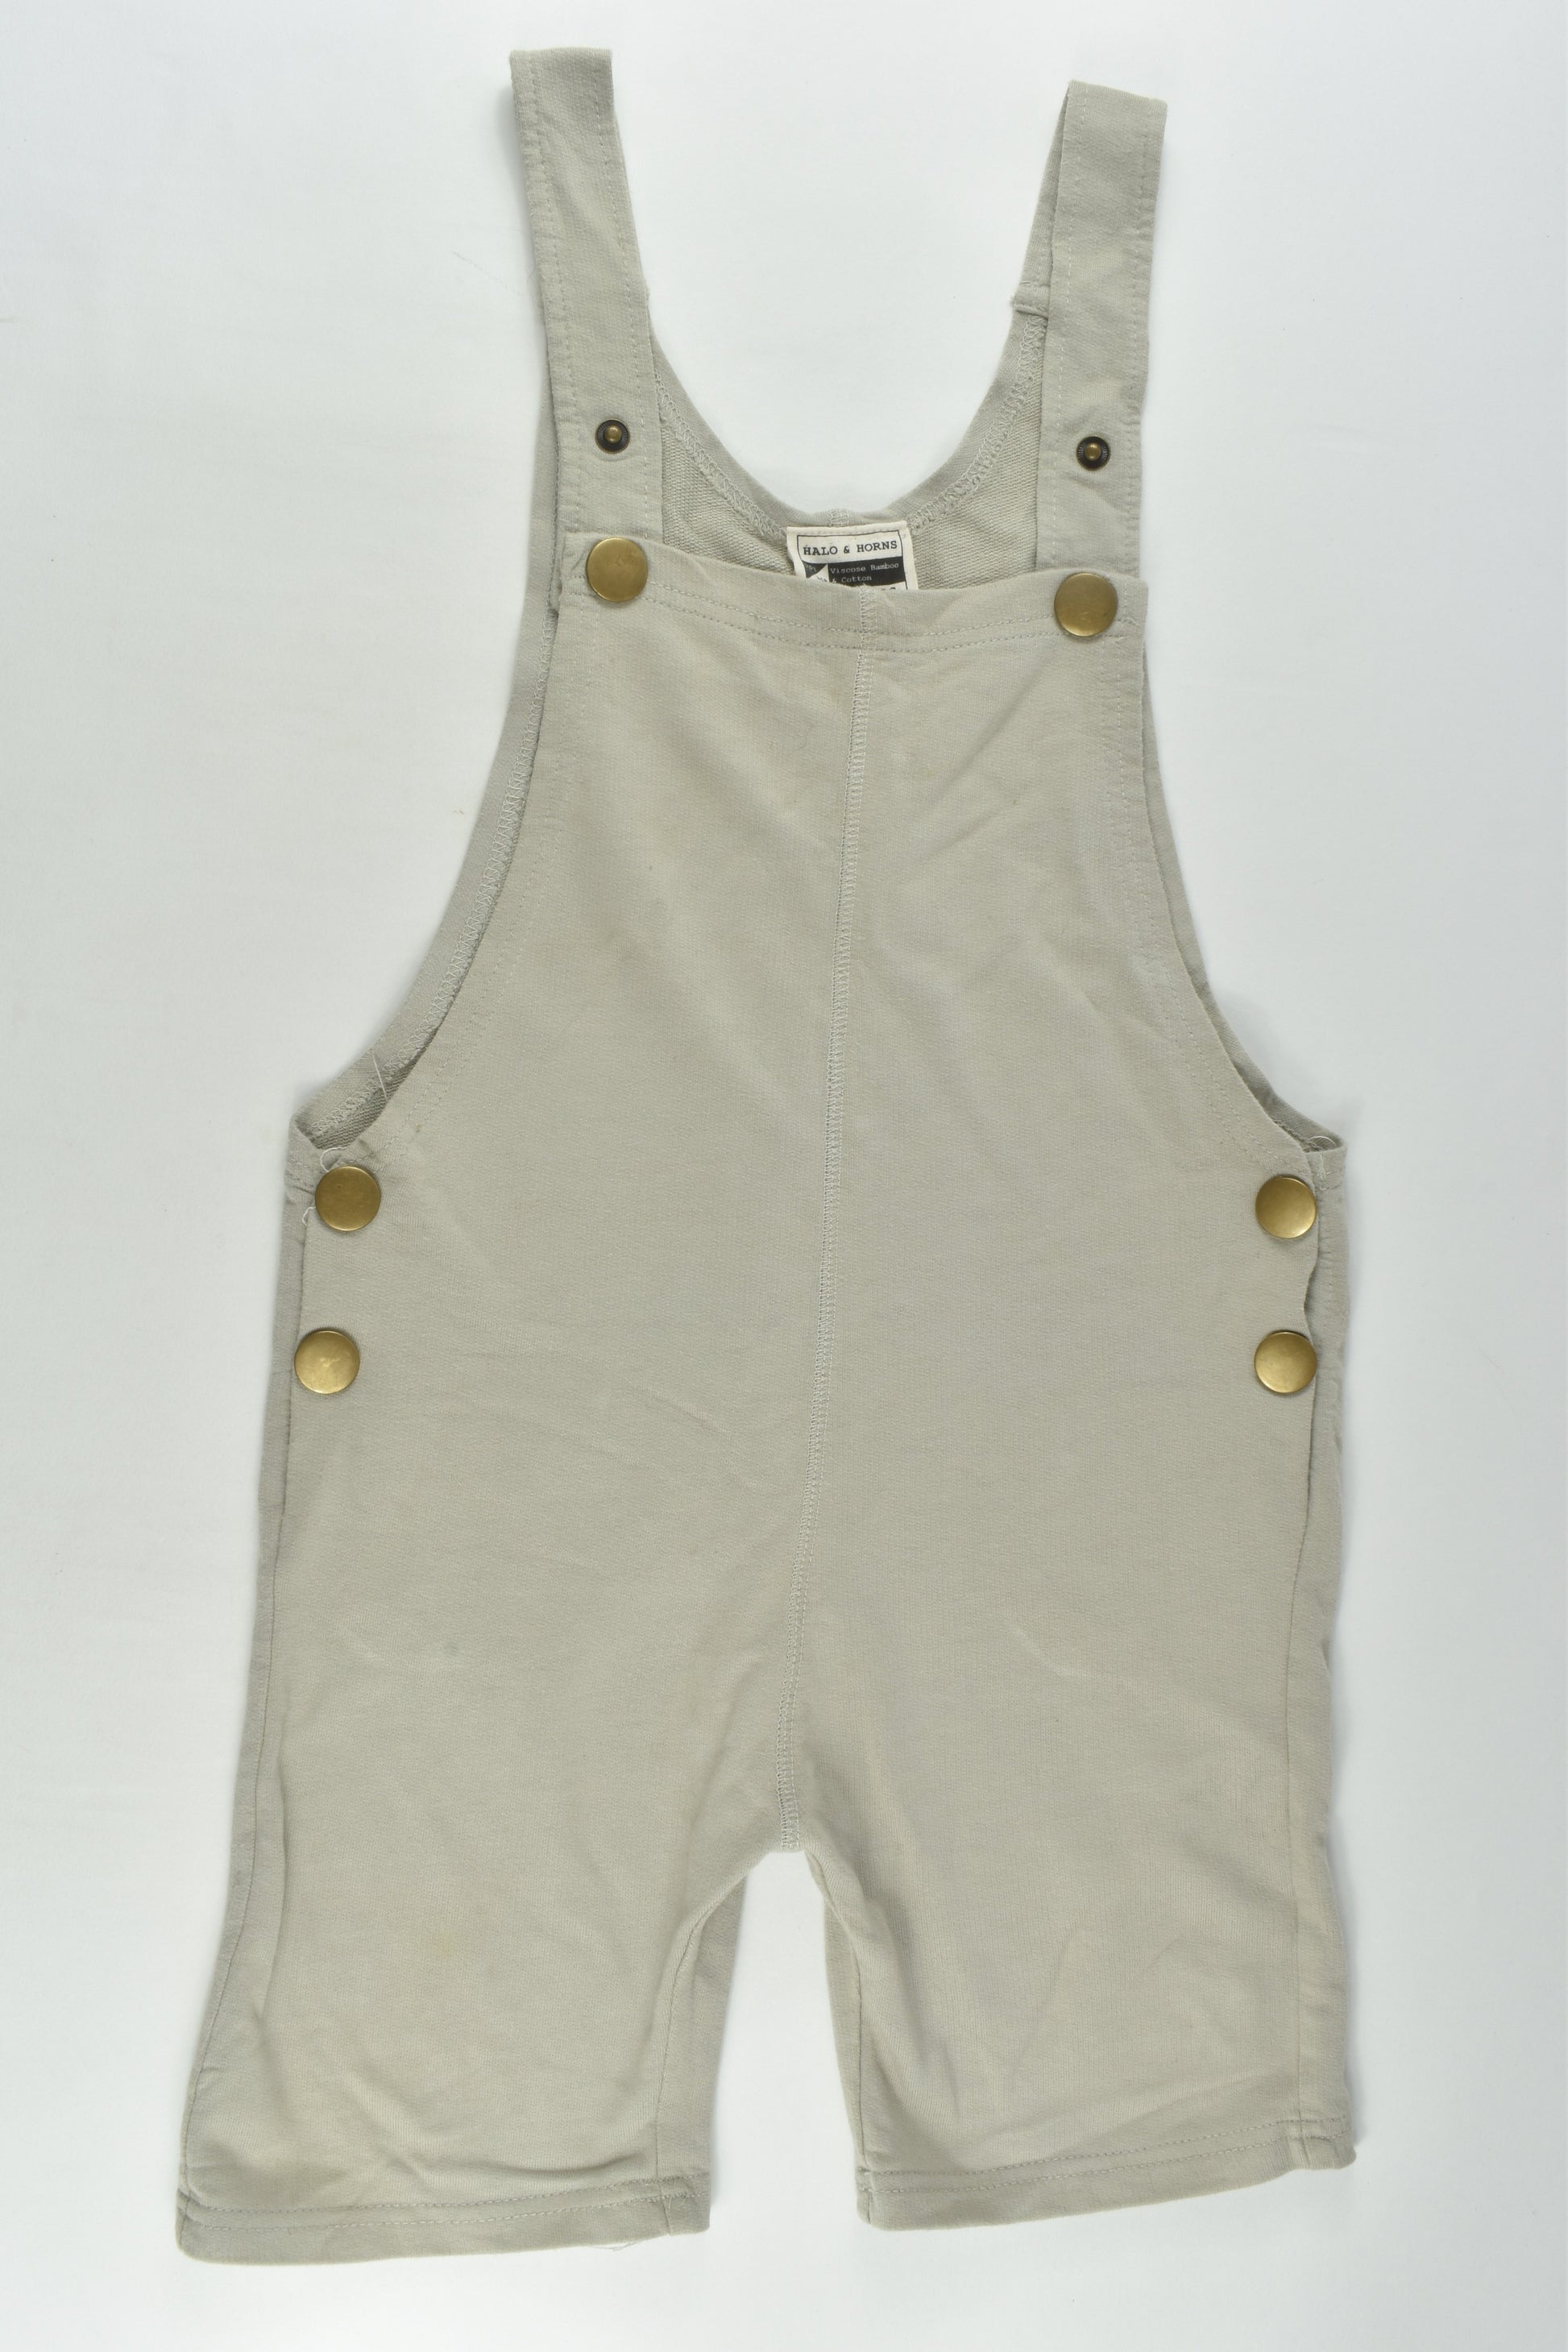 Halo & Horns Size 3-4 Bamboo Blend Overalls